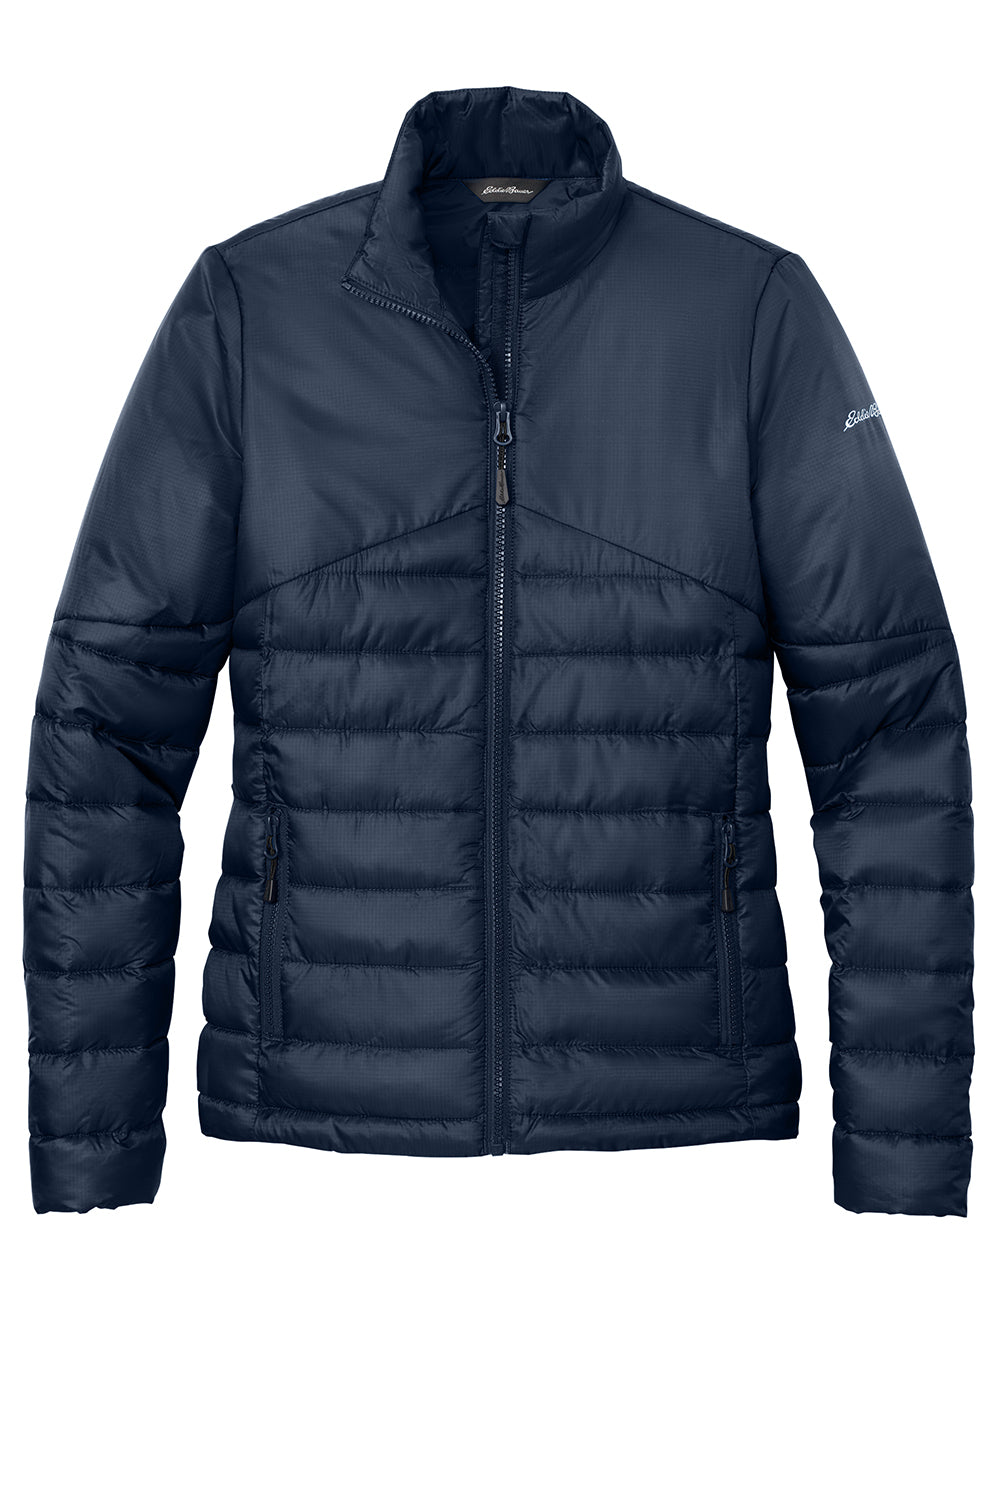 Eddie Bauer EB511 Womens Water Resistant Quilted Full Zip Jacket River Navy Blue Flat Front